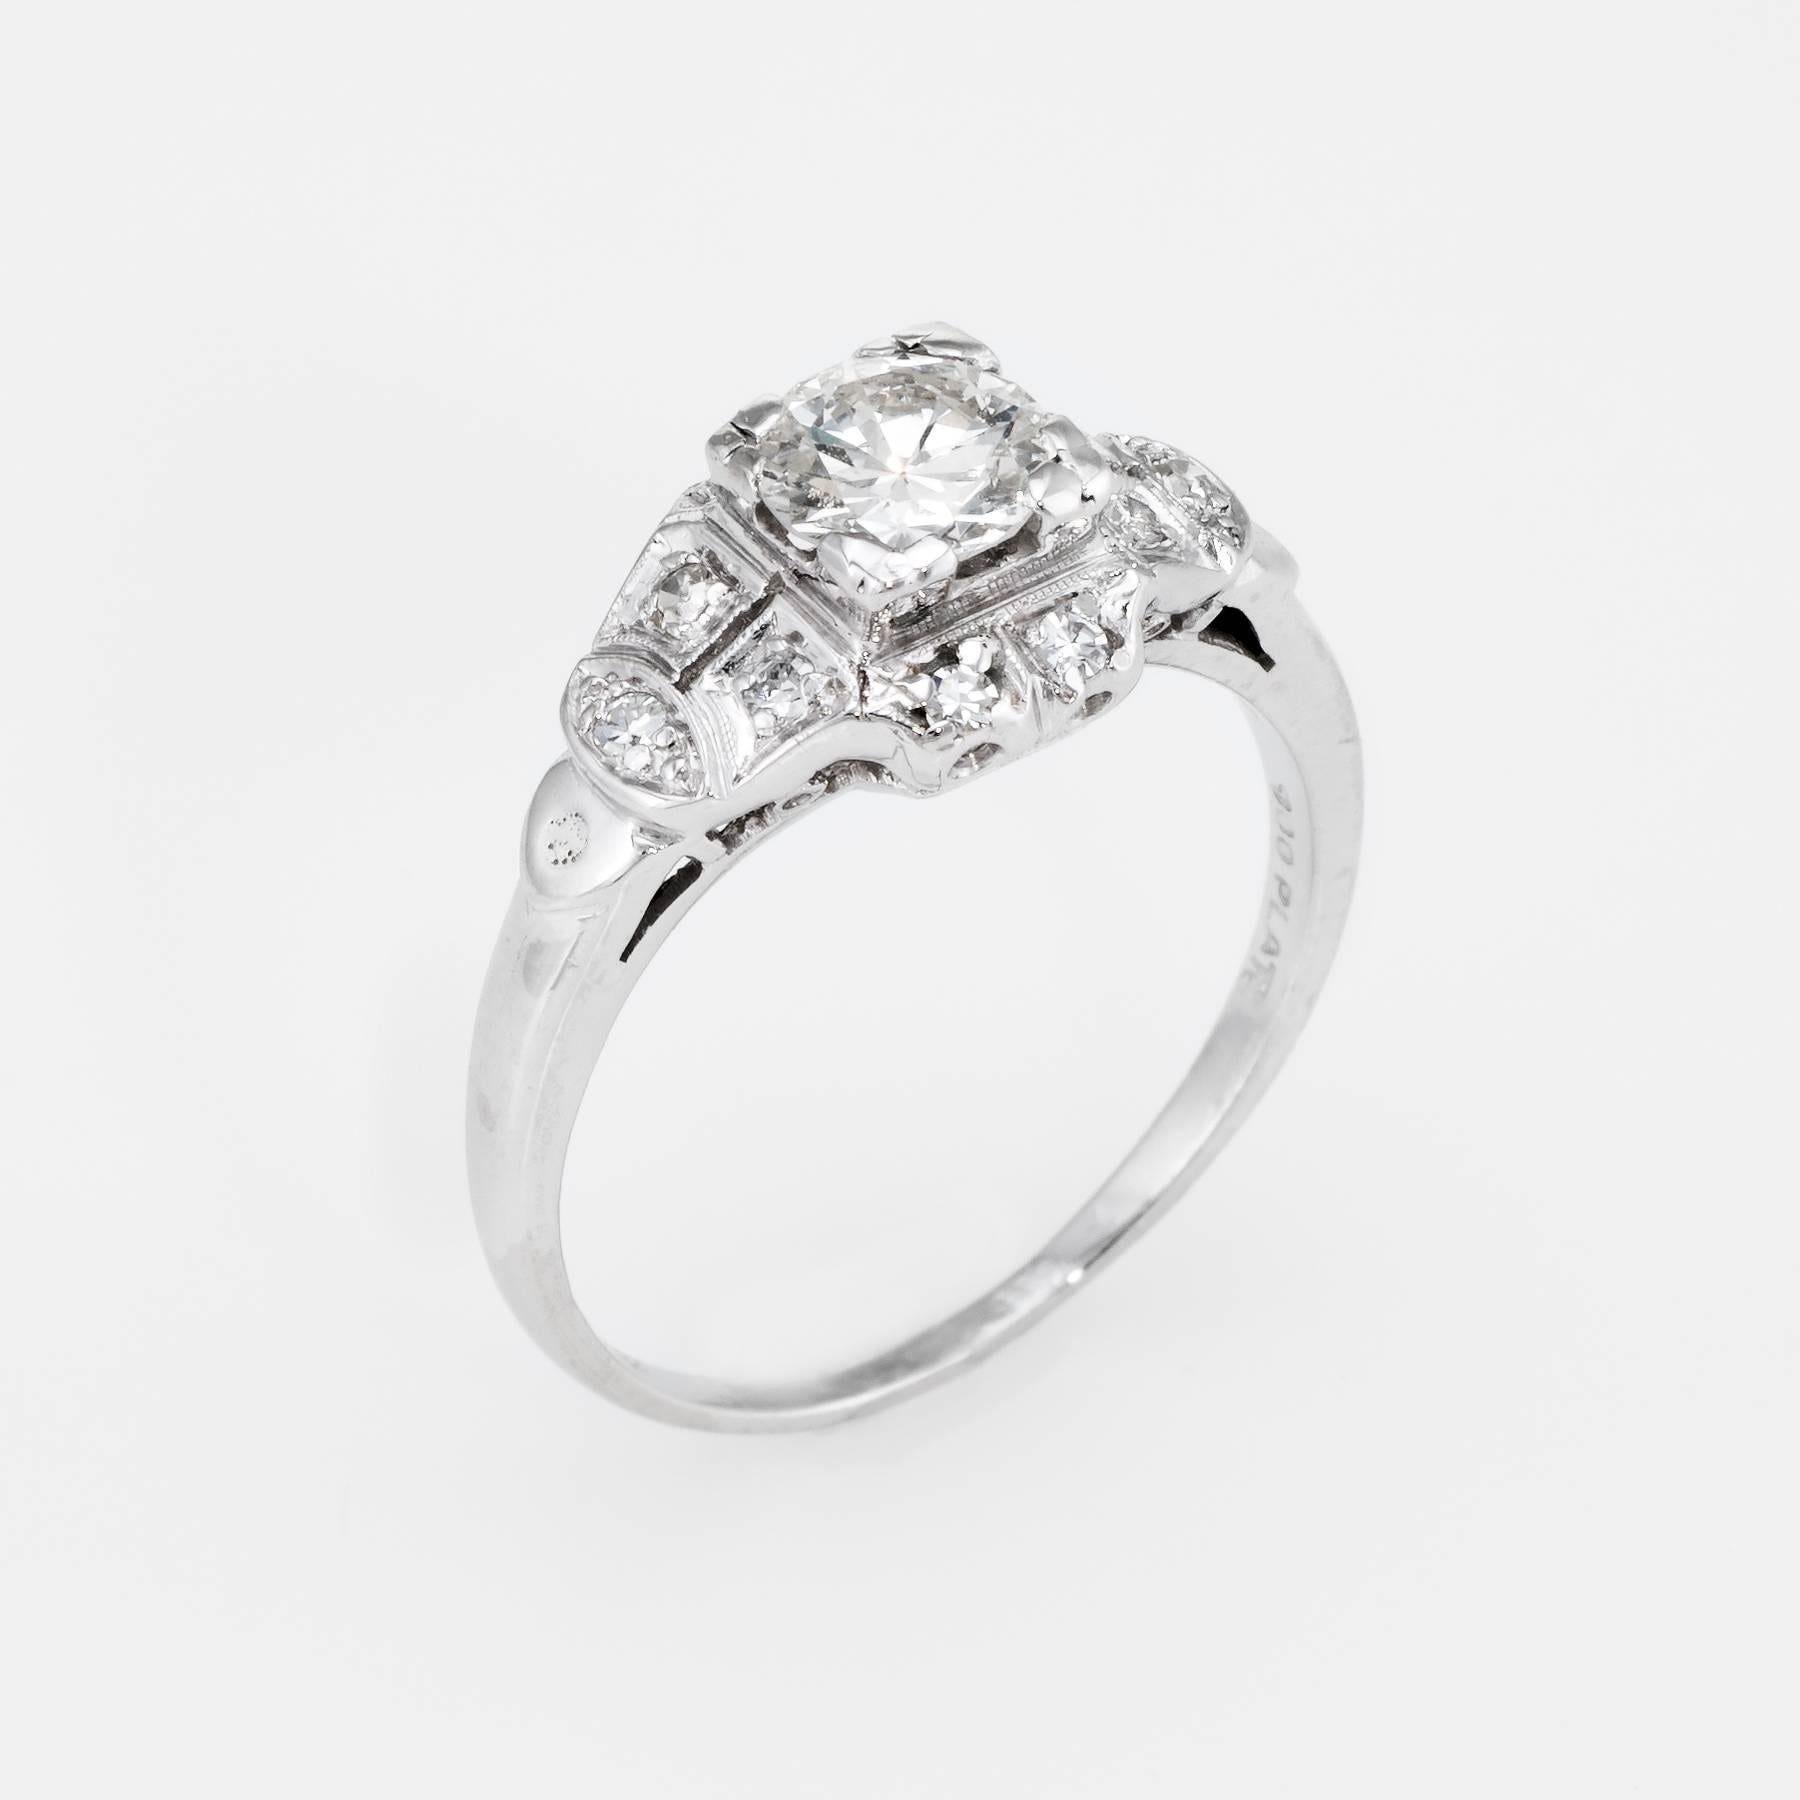 Finely detailed vintage Art Deco era ring (circa 1920s to 1930s), crafted in 900 platinum. 

Centrally mounted estimated 0.75 carat old European cut diamond is accented with 10 x 0.01 carat single cut diamonds. The total diamond weight is estimated